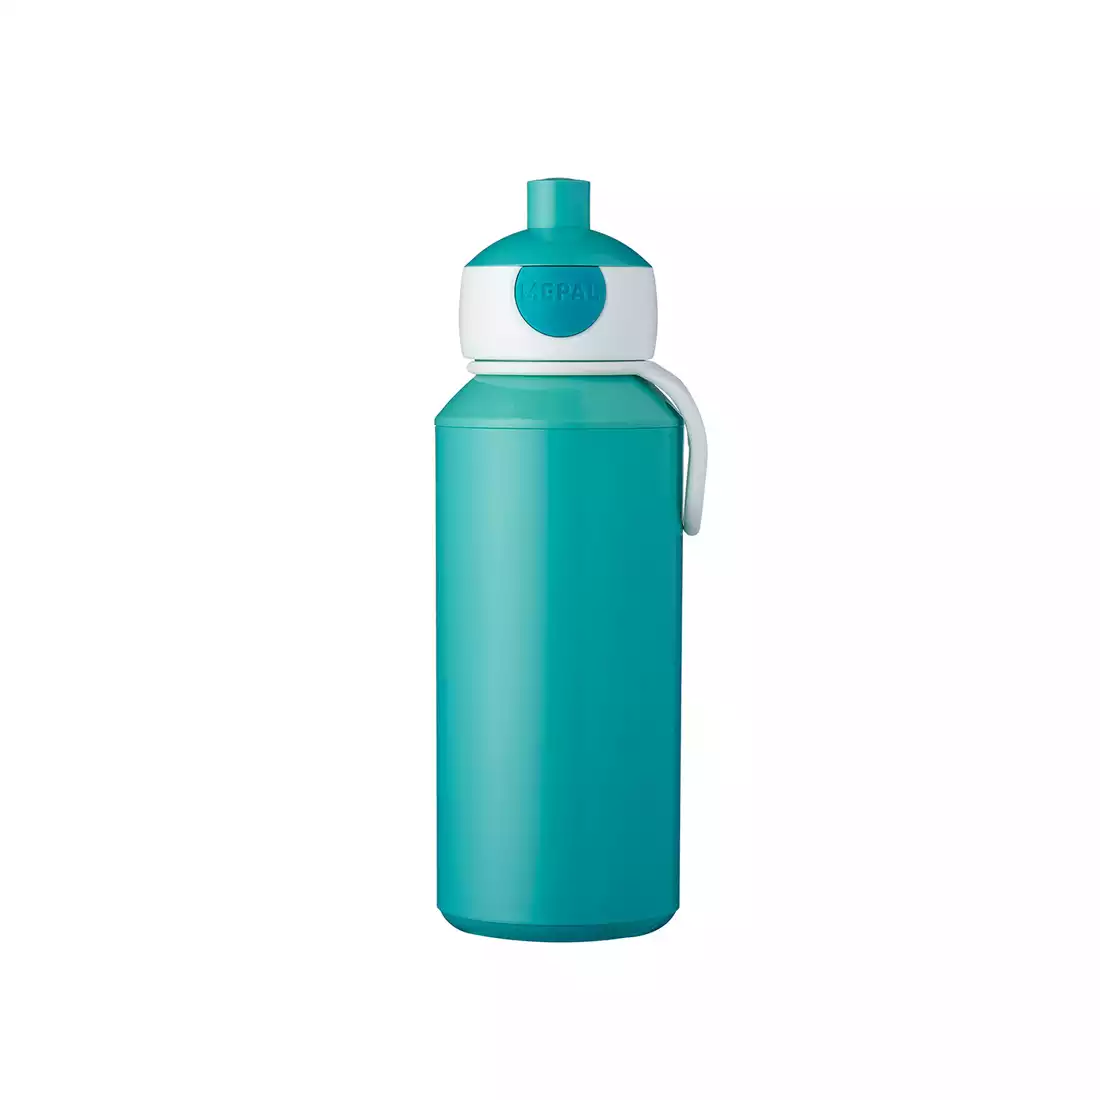 MEPAL POP-UP CAMPUS water bottle for children 400 ml turquoise